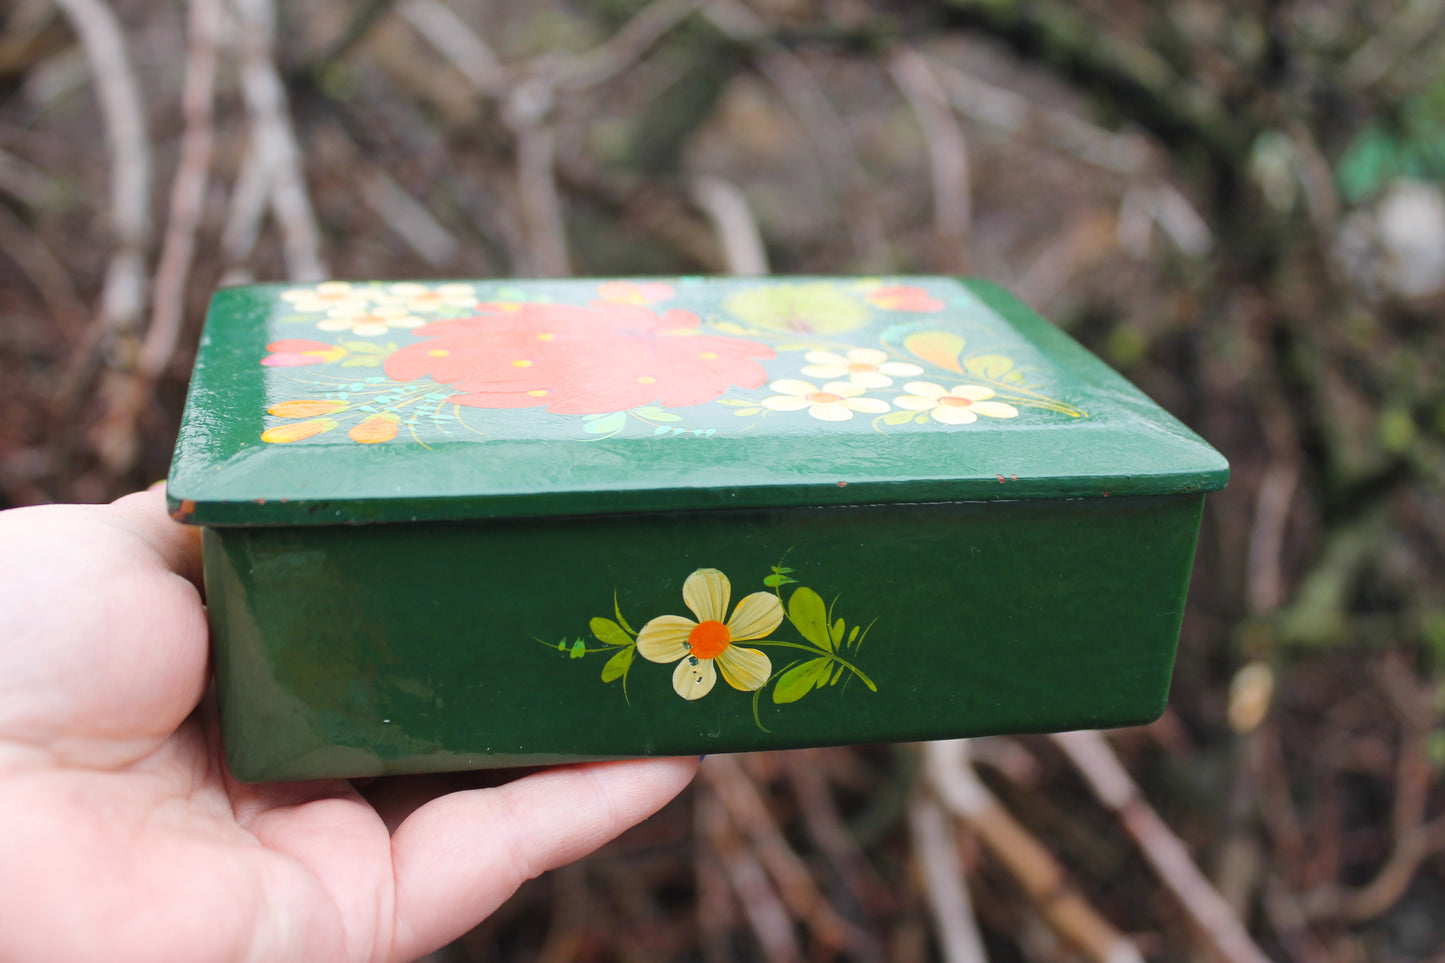 Vintage jewelry green wooden box - Petrykivka box - 6.1 inches - USSR vintage - vintage flower box - made in Ukraine